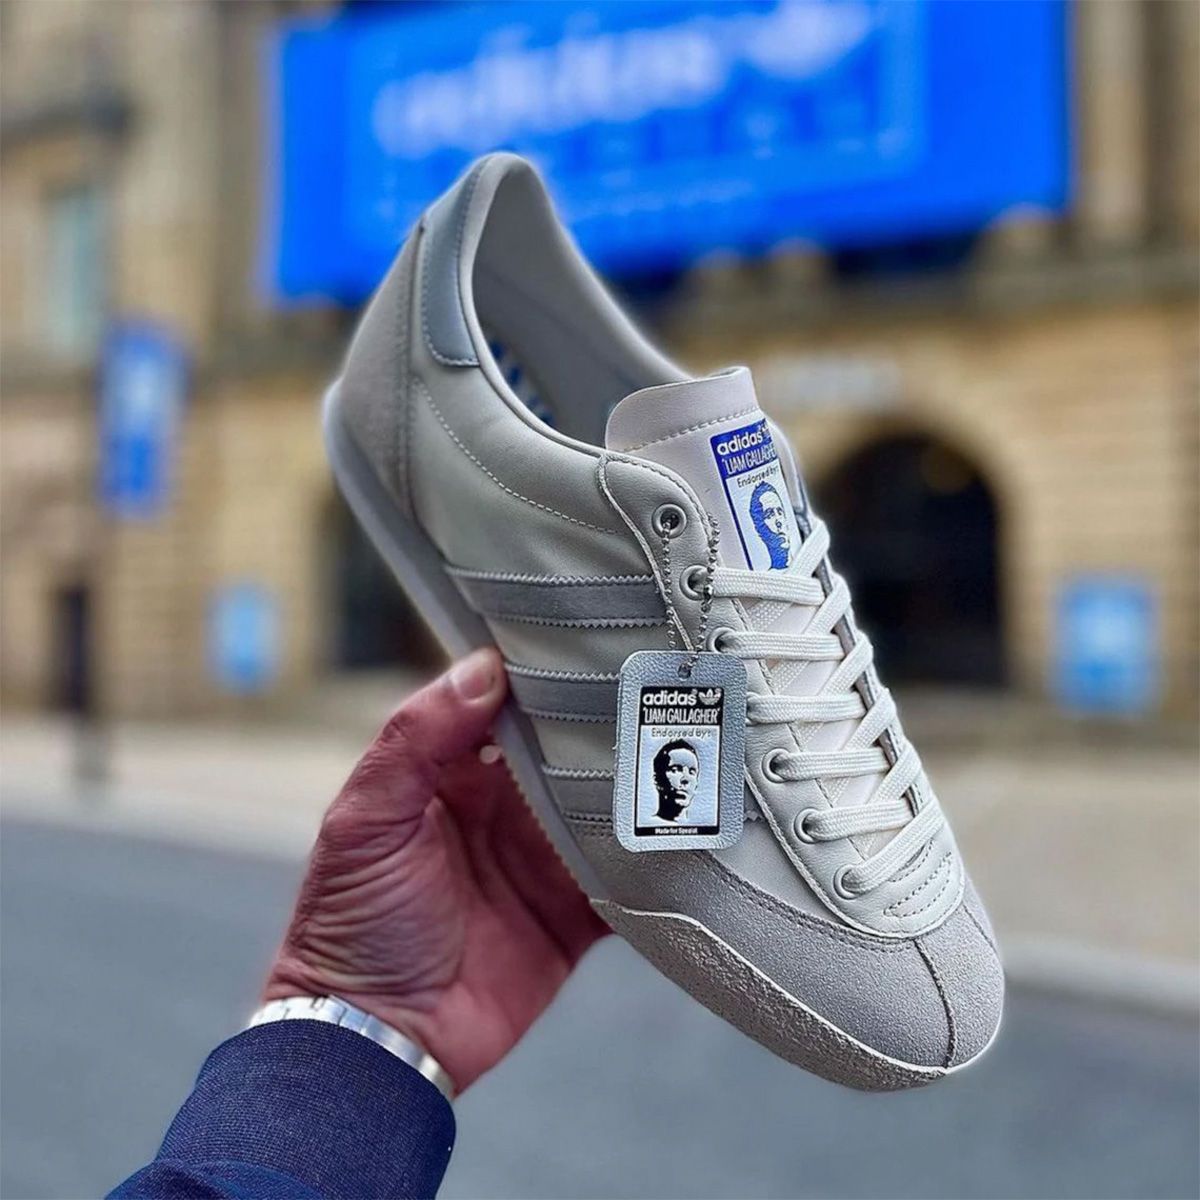 Liam Gallagher x adidas LG 2 SPZL Releases This Week | HOUSE OF HEAT